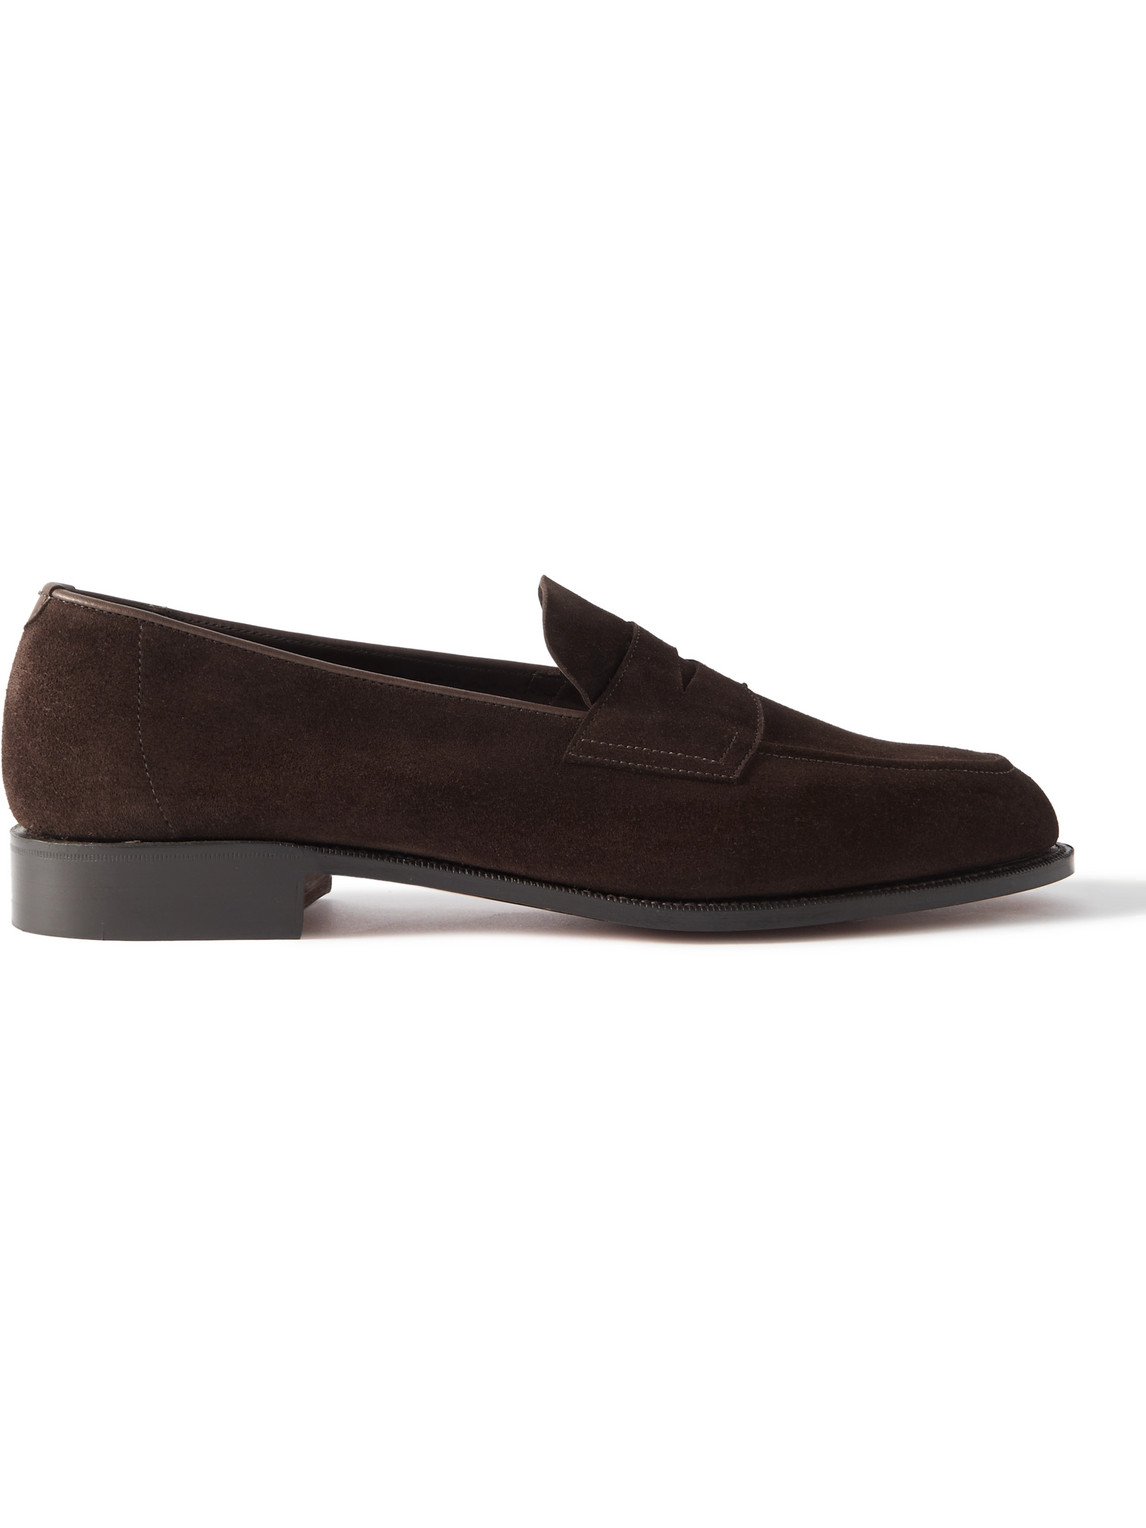 EDWARD GREEN PICADILLY SUEDE PENNY LOAFERS